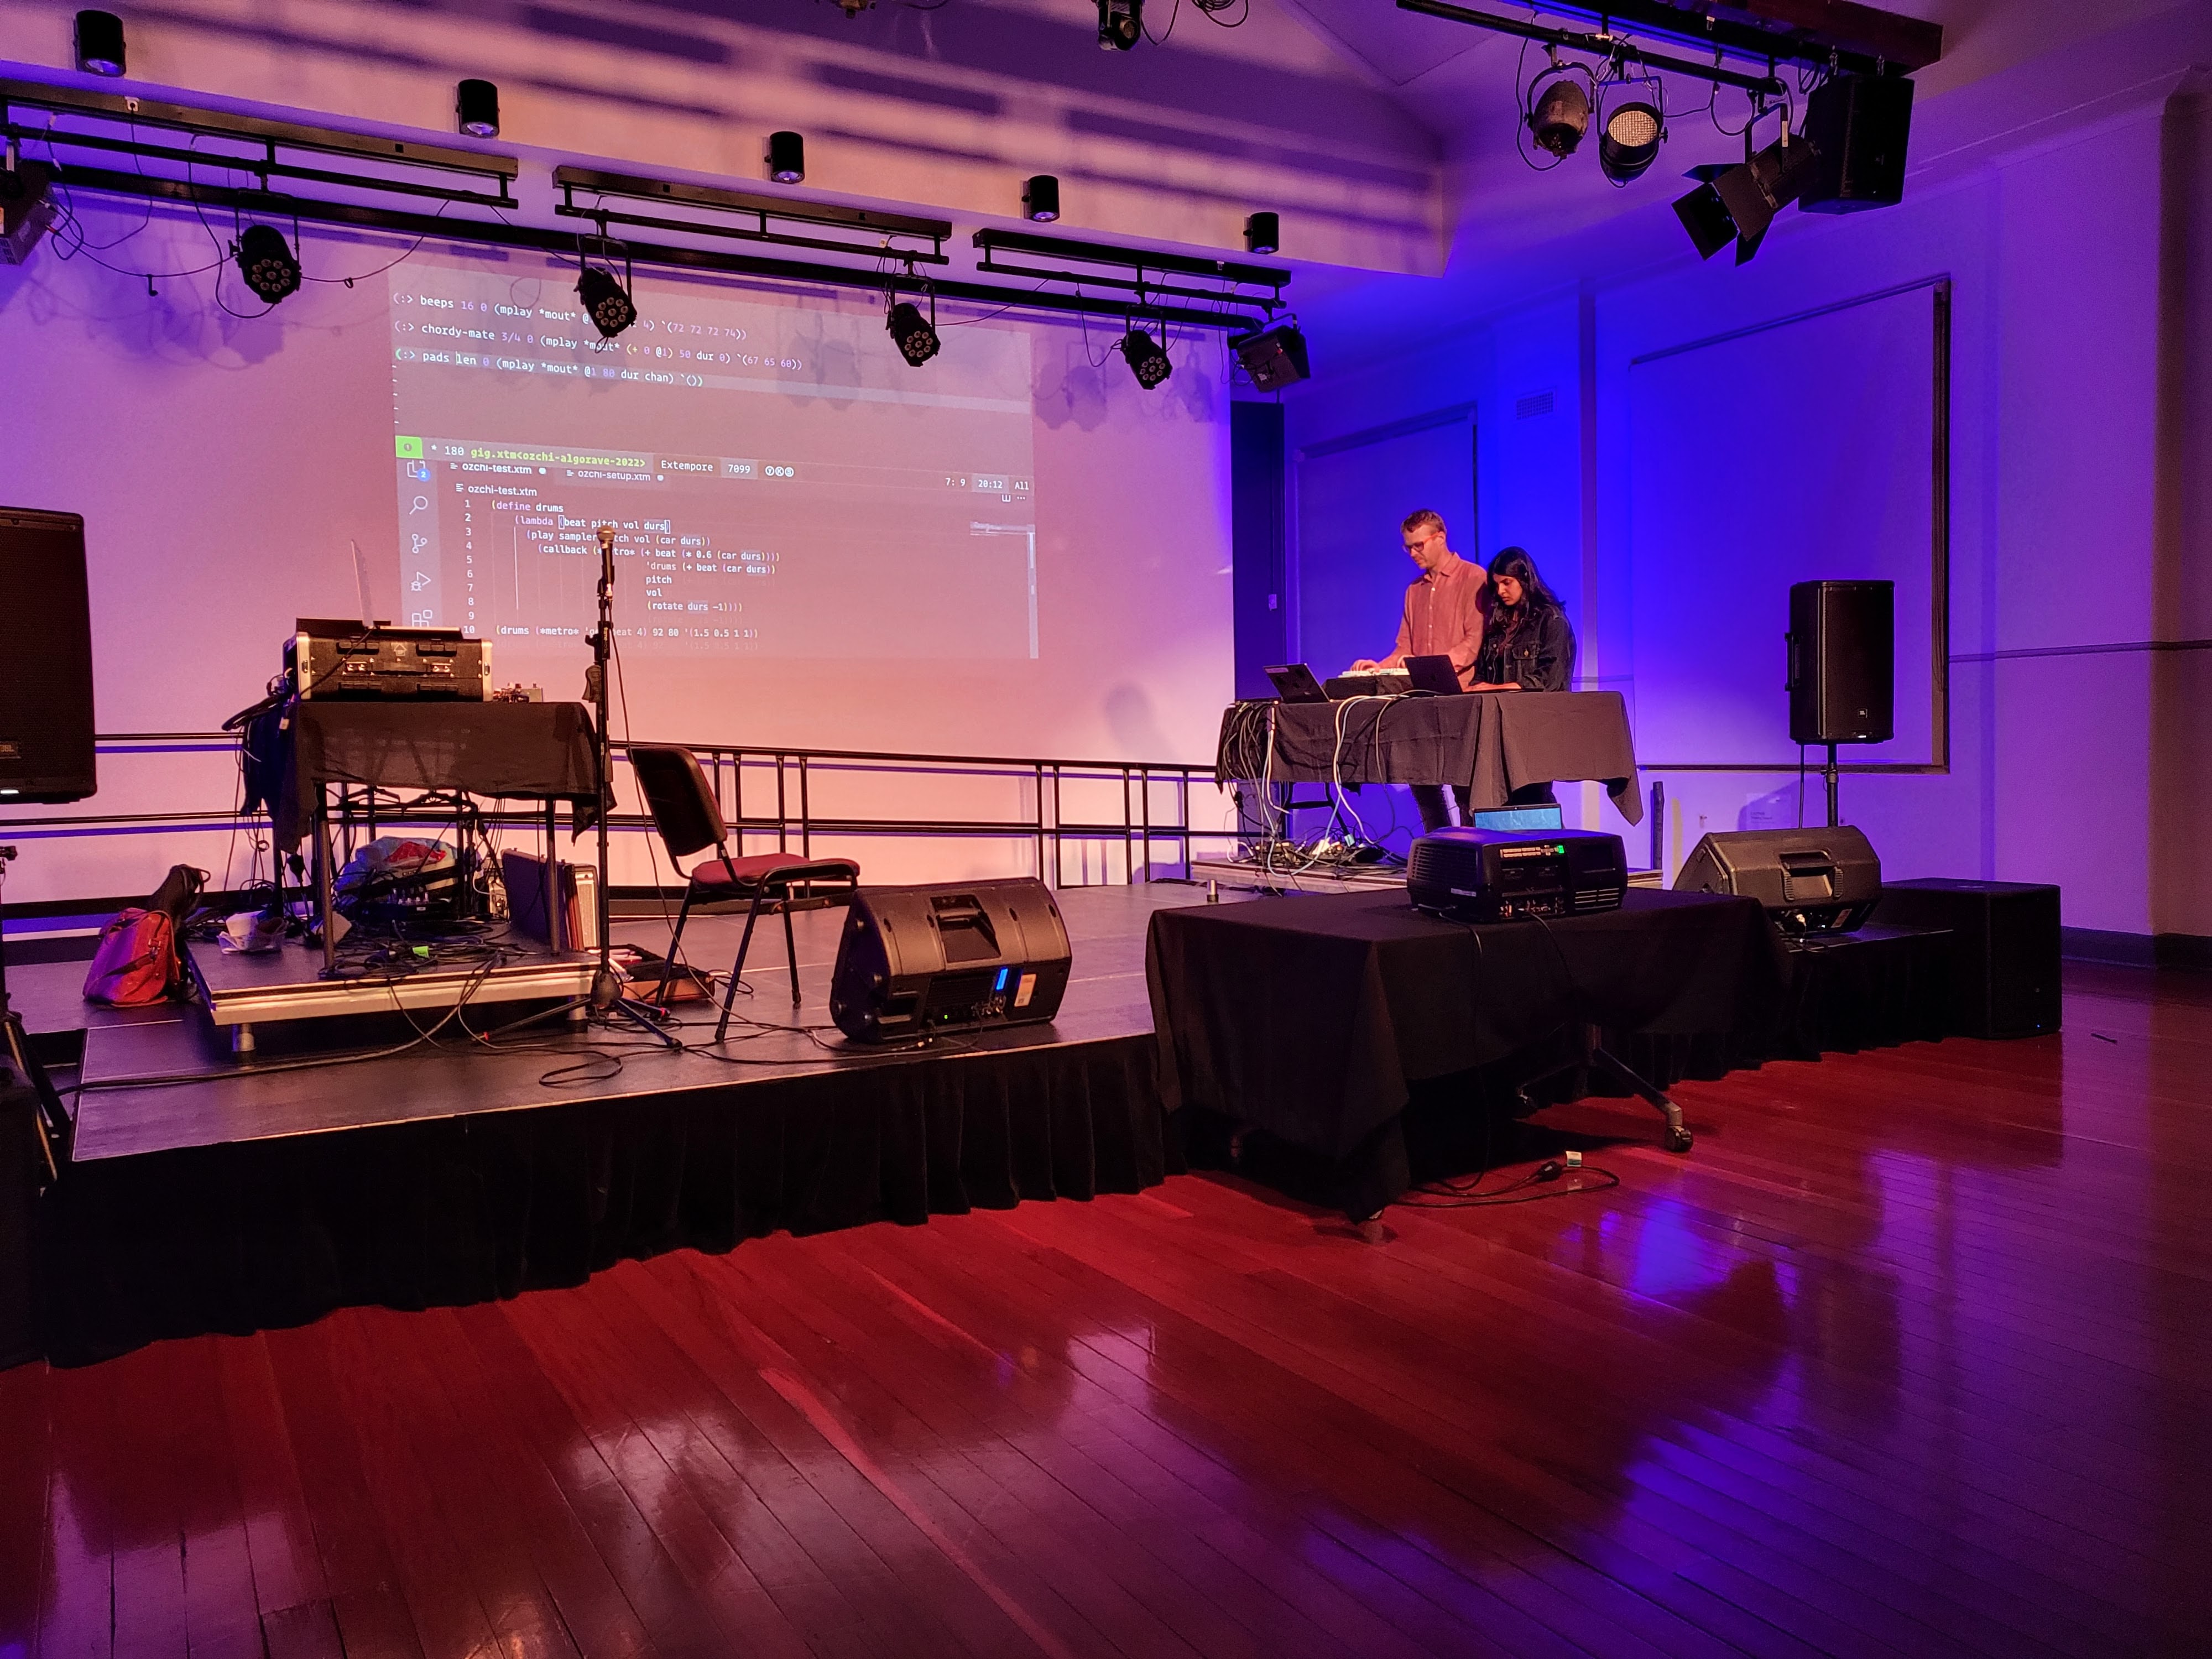 Ben & Ushini on a stage llivecoding at the OzCHI Connected Creativity gig